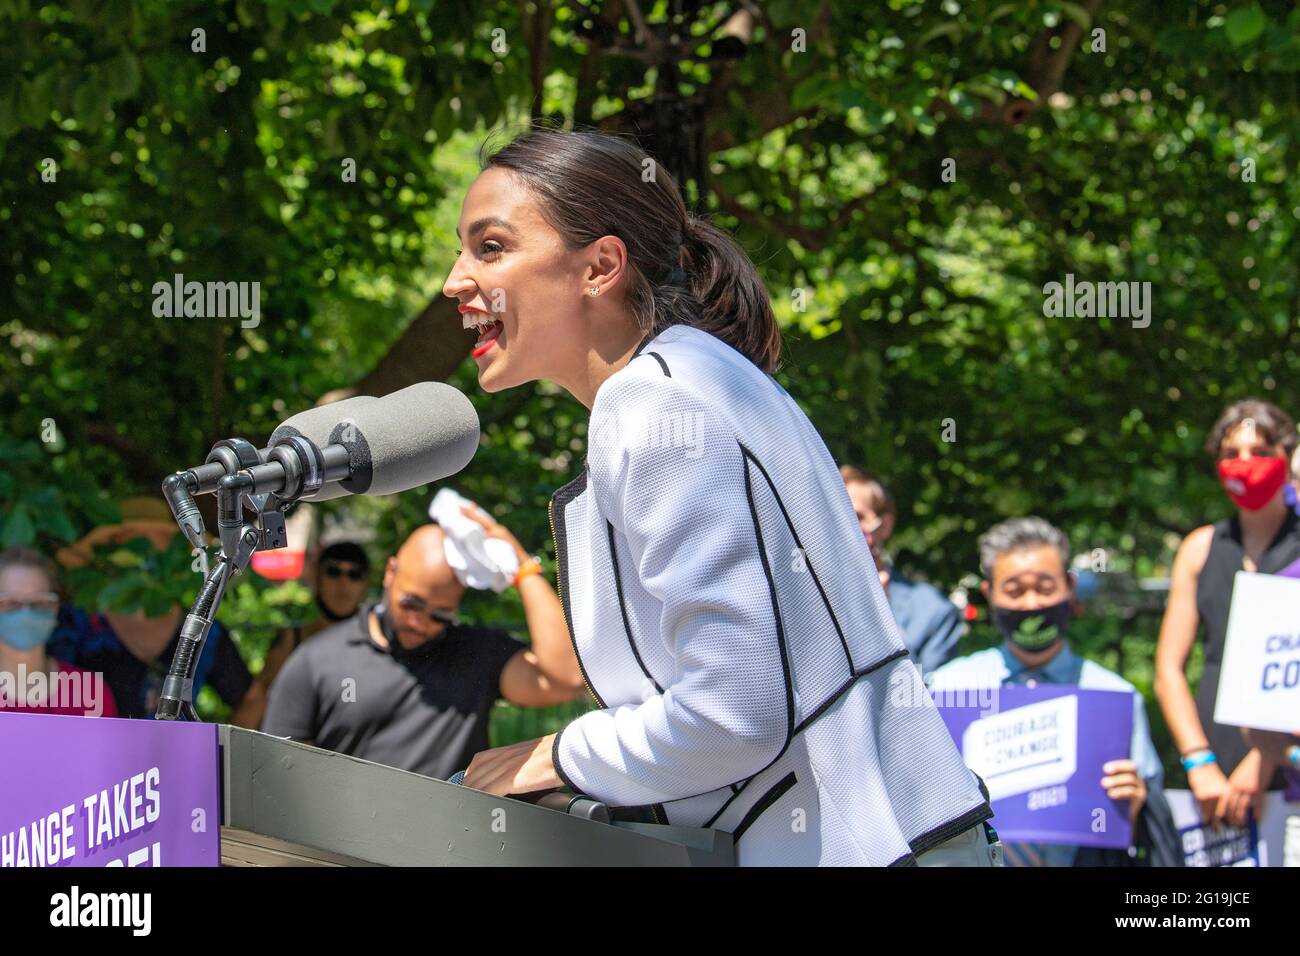 United States Congresswoman Alexandria Ocasio-Cortez speaks at a rally outside City Hall in New York City. Representative Alexandria Ocasio-Cortez endorses Juumane Williams for Public Advocate, Brad Lander for Comptroller as well as 60 progressive New York City Council candidates, stretching across all five boroughs, who took the Courage To Change pledge. (Photo by Ron Adar / SOPA Images/Sipa USA) Stock Photo